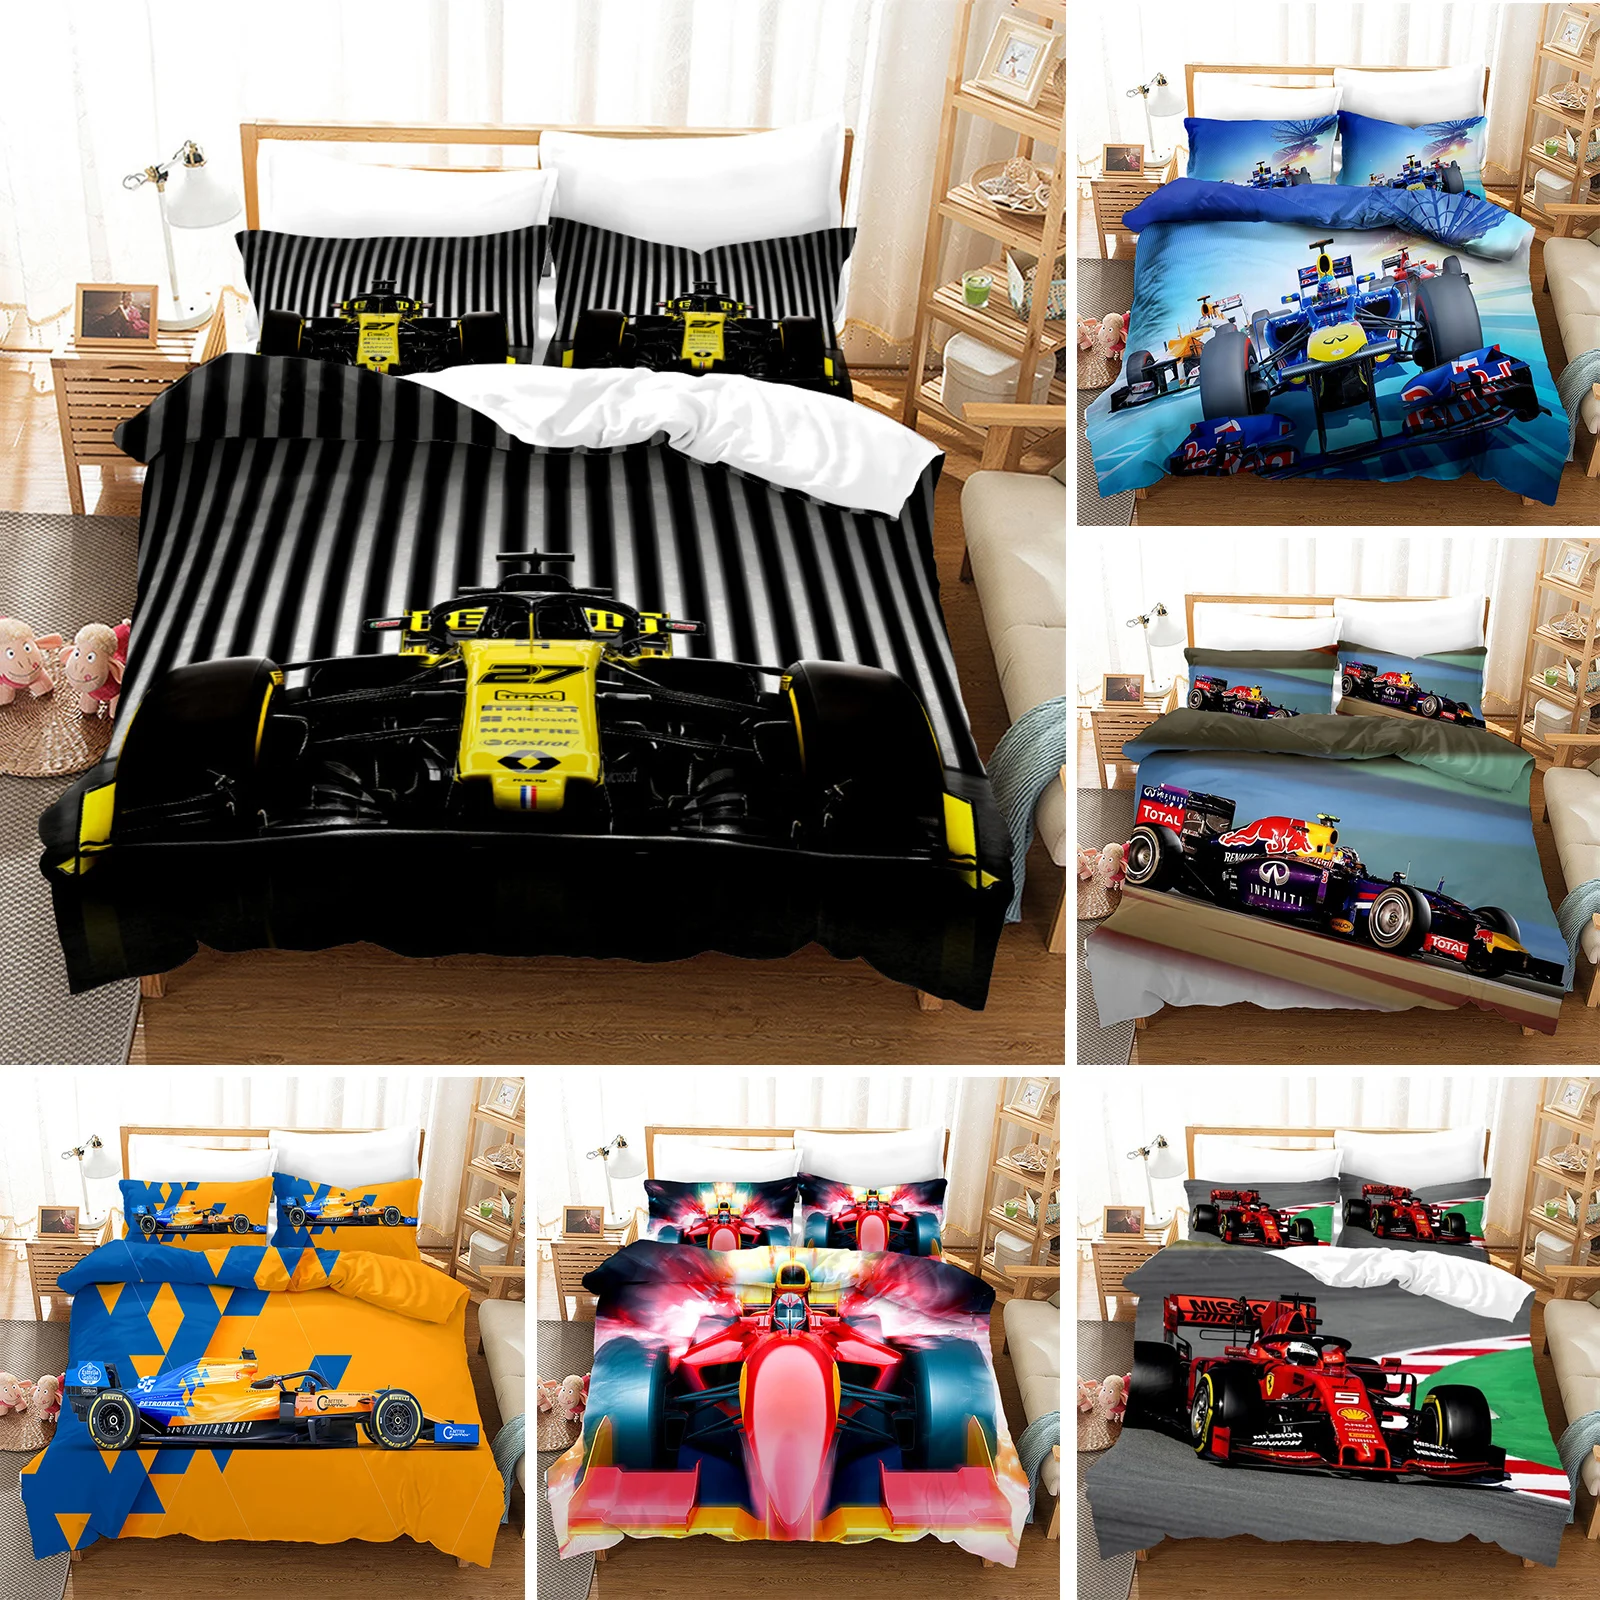 

Red Racing Car 3D Kids Boy Bedding Set F1 Game Racer Printing Duvet Cover 2/3pcs Bedclothes with Pillowcase Twin Full Bedspread